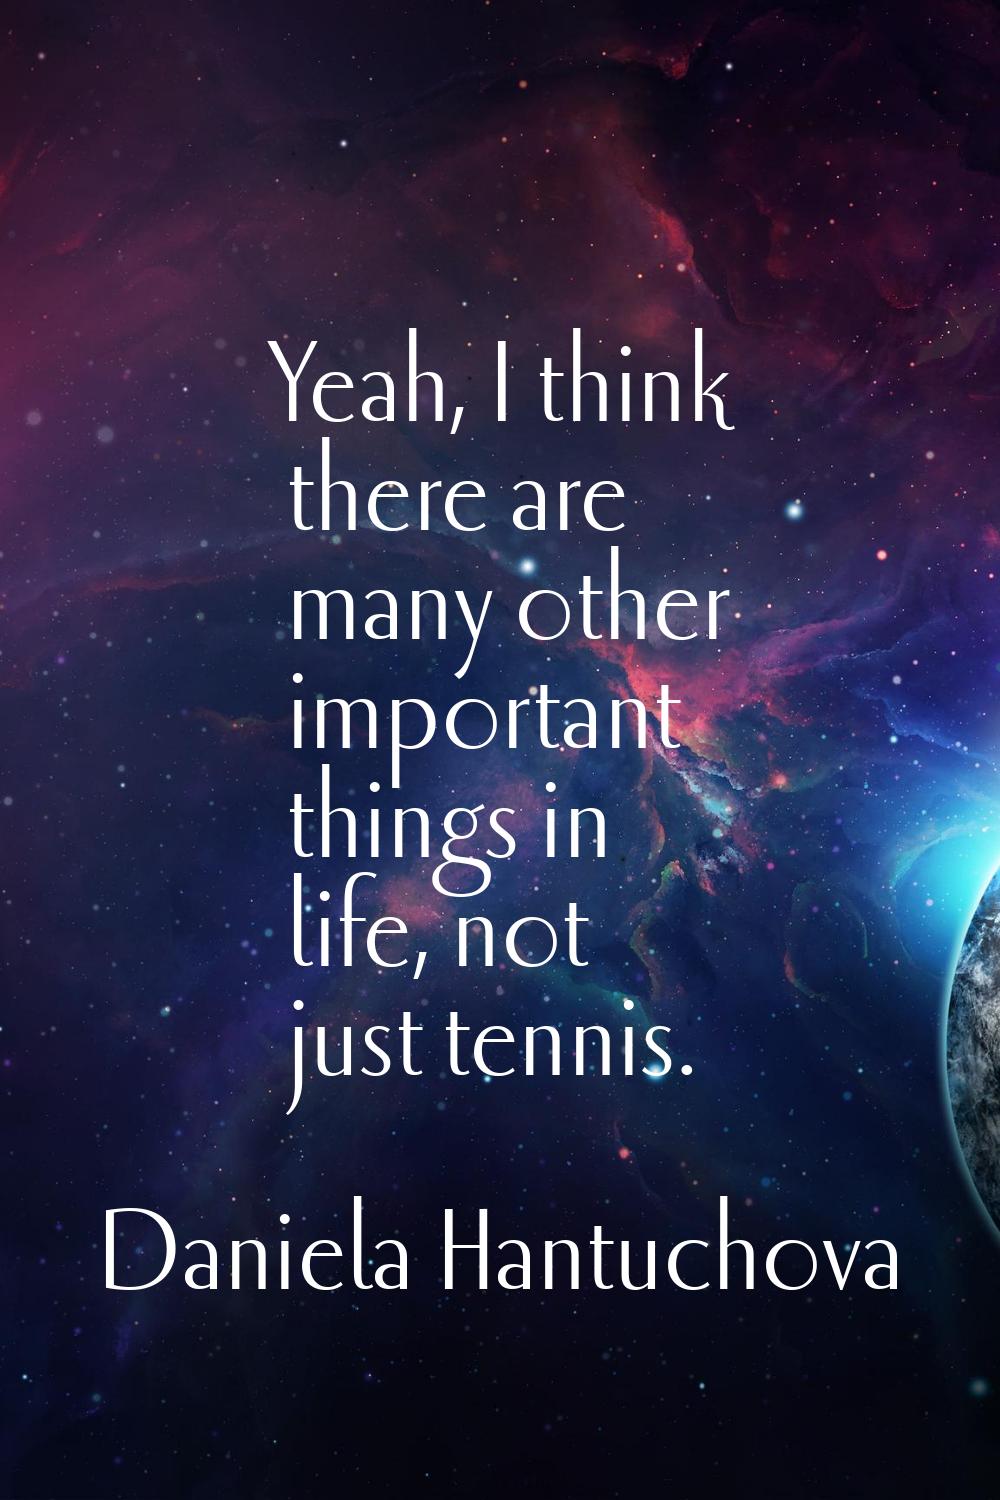 Yeah, I think there are many other important things in life, not just tennis.